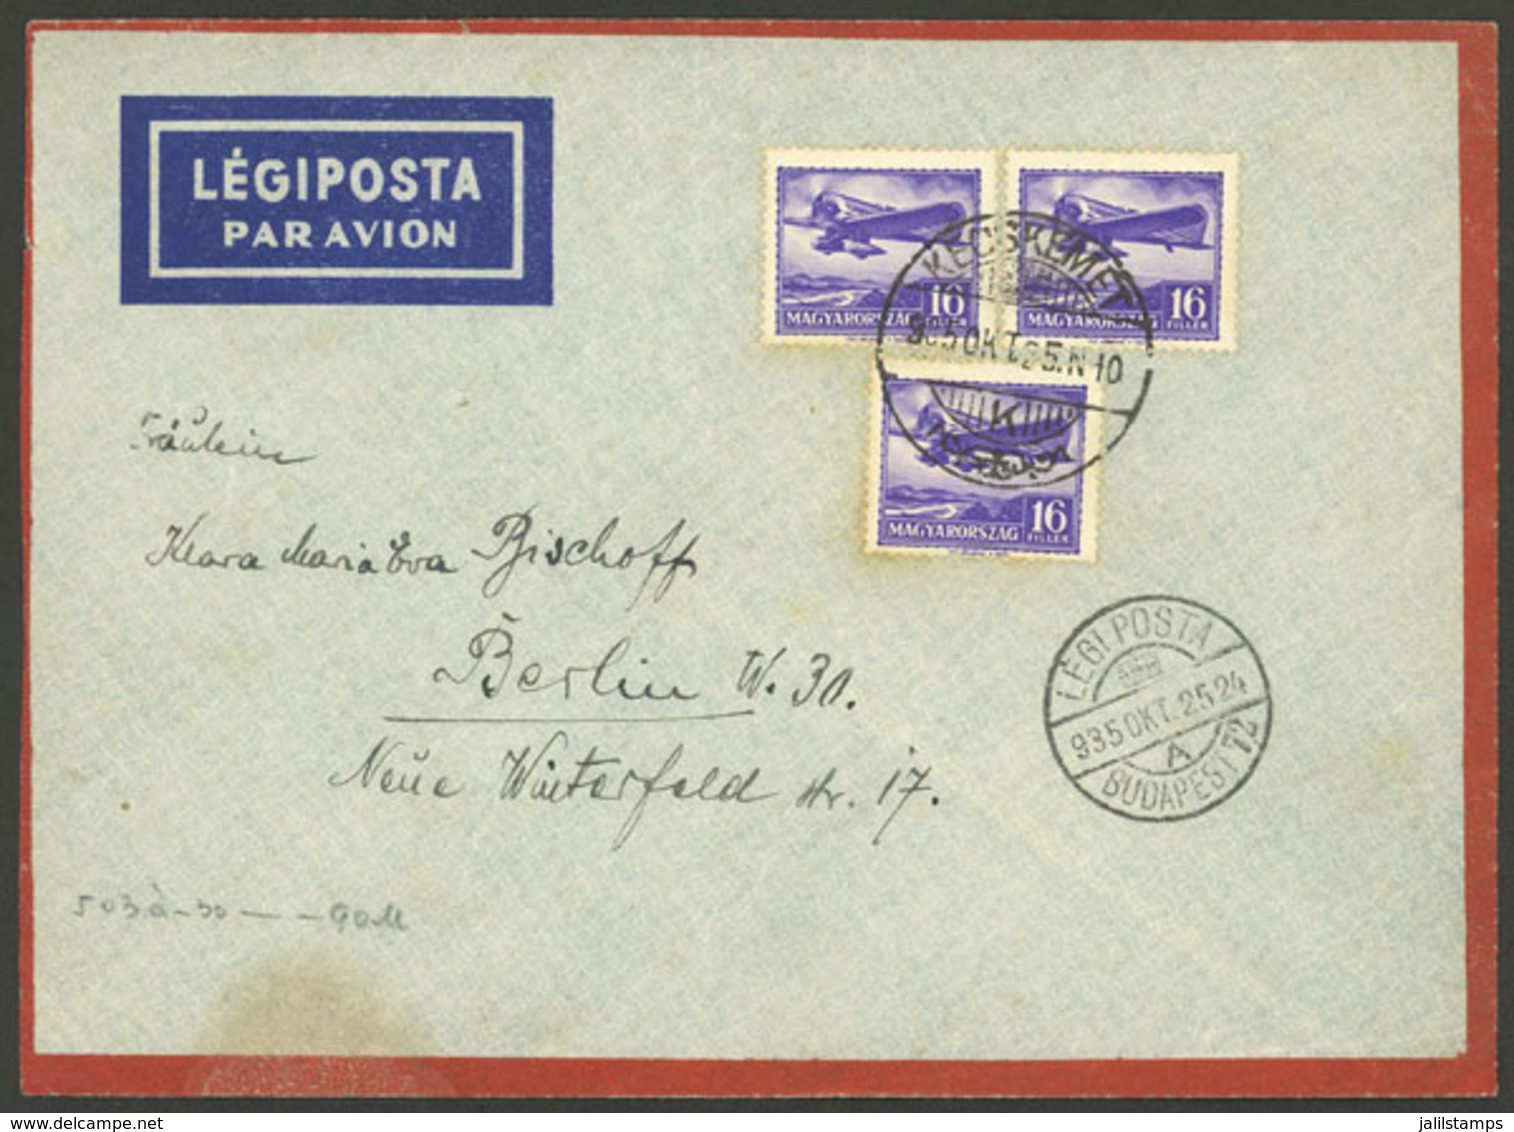 HUNGARY: 25/OC/1925 KECSKEMET - Berlin (Germany), Airmail Cover With Nice Franking And Budapest Transit Mark, Very Nice! - Lettres & Documents